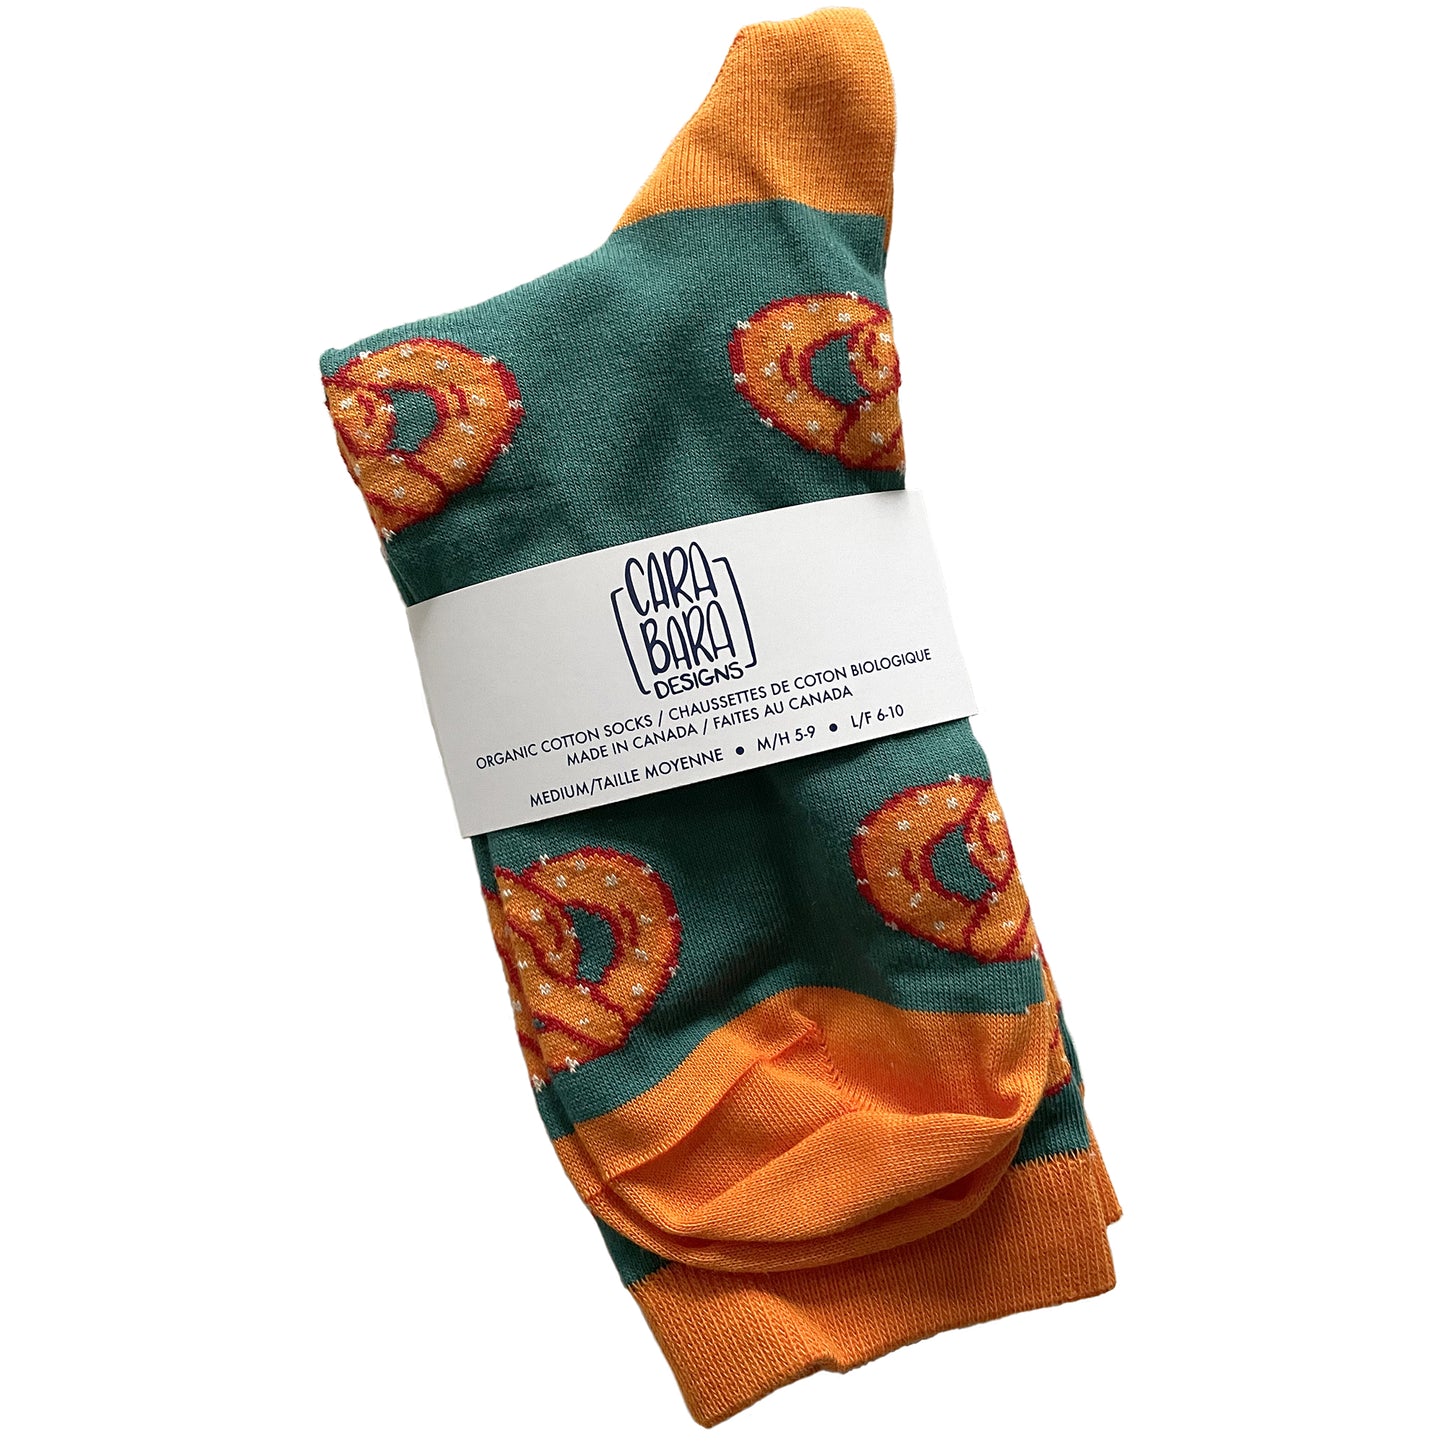 A pair of green socks with orange accents is patterned with orange pretzels and is folded and labelled with a belly band with the Carabara Designs logo and the words organic cotton socks made in Canada, size medium, in English and French.